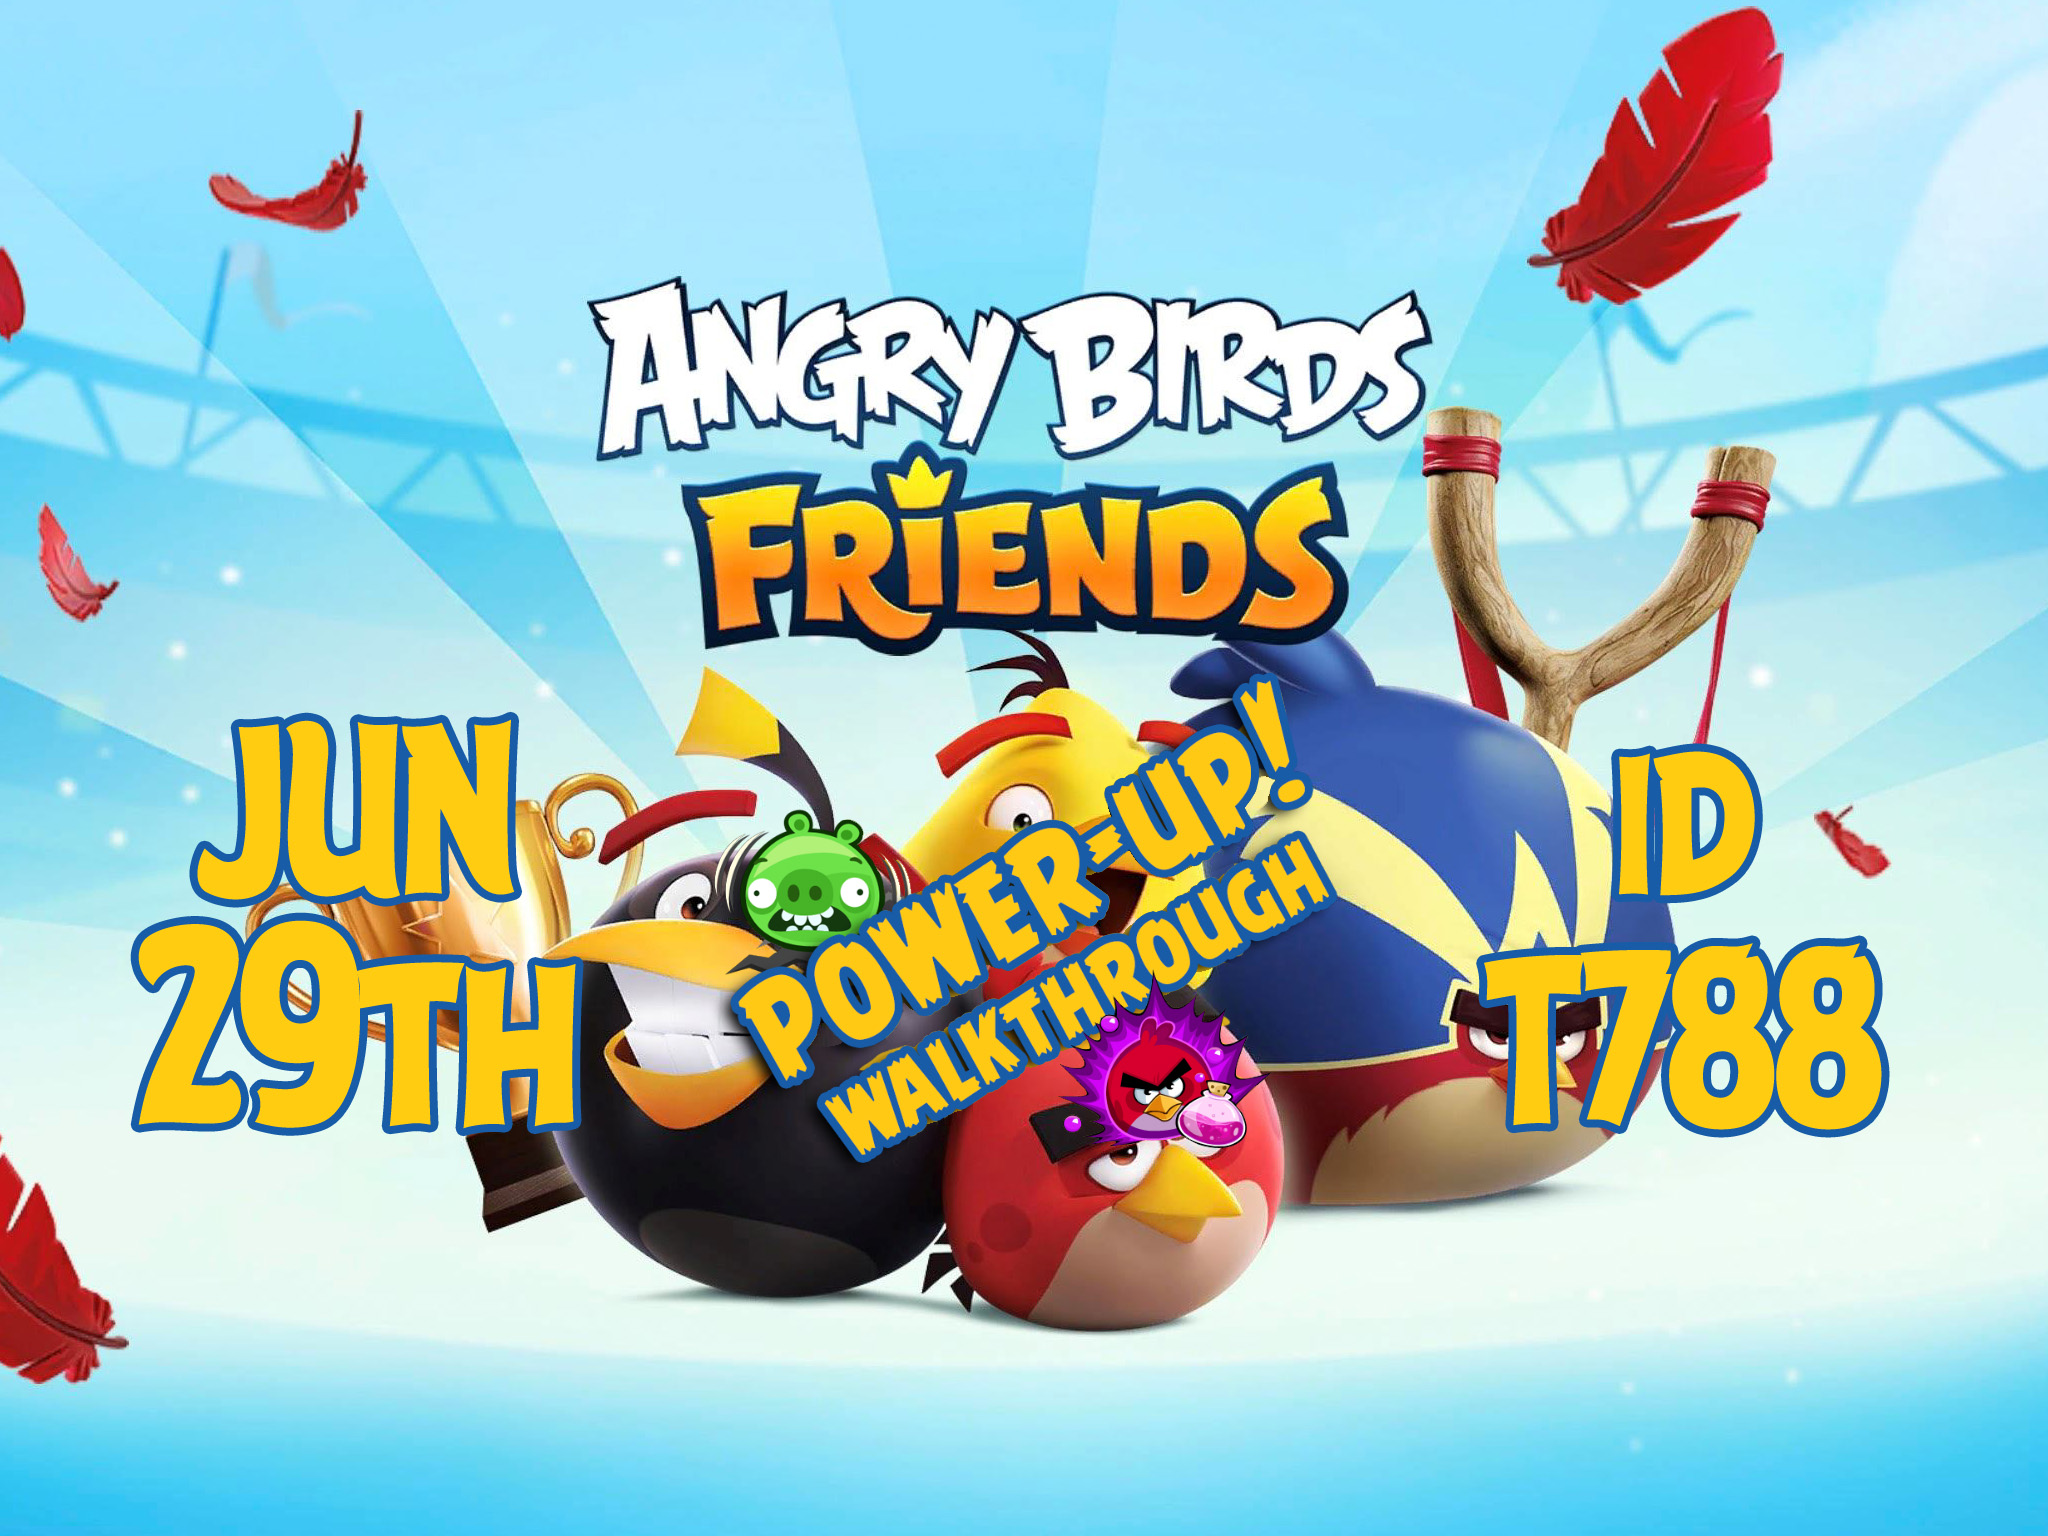 Angry-Birds-Friends-Tournament-T788-Feature-Image-PU